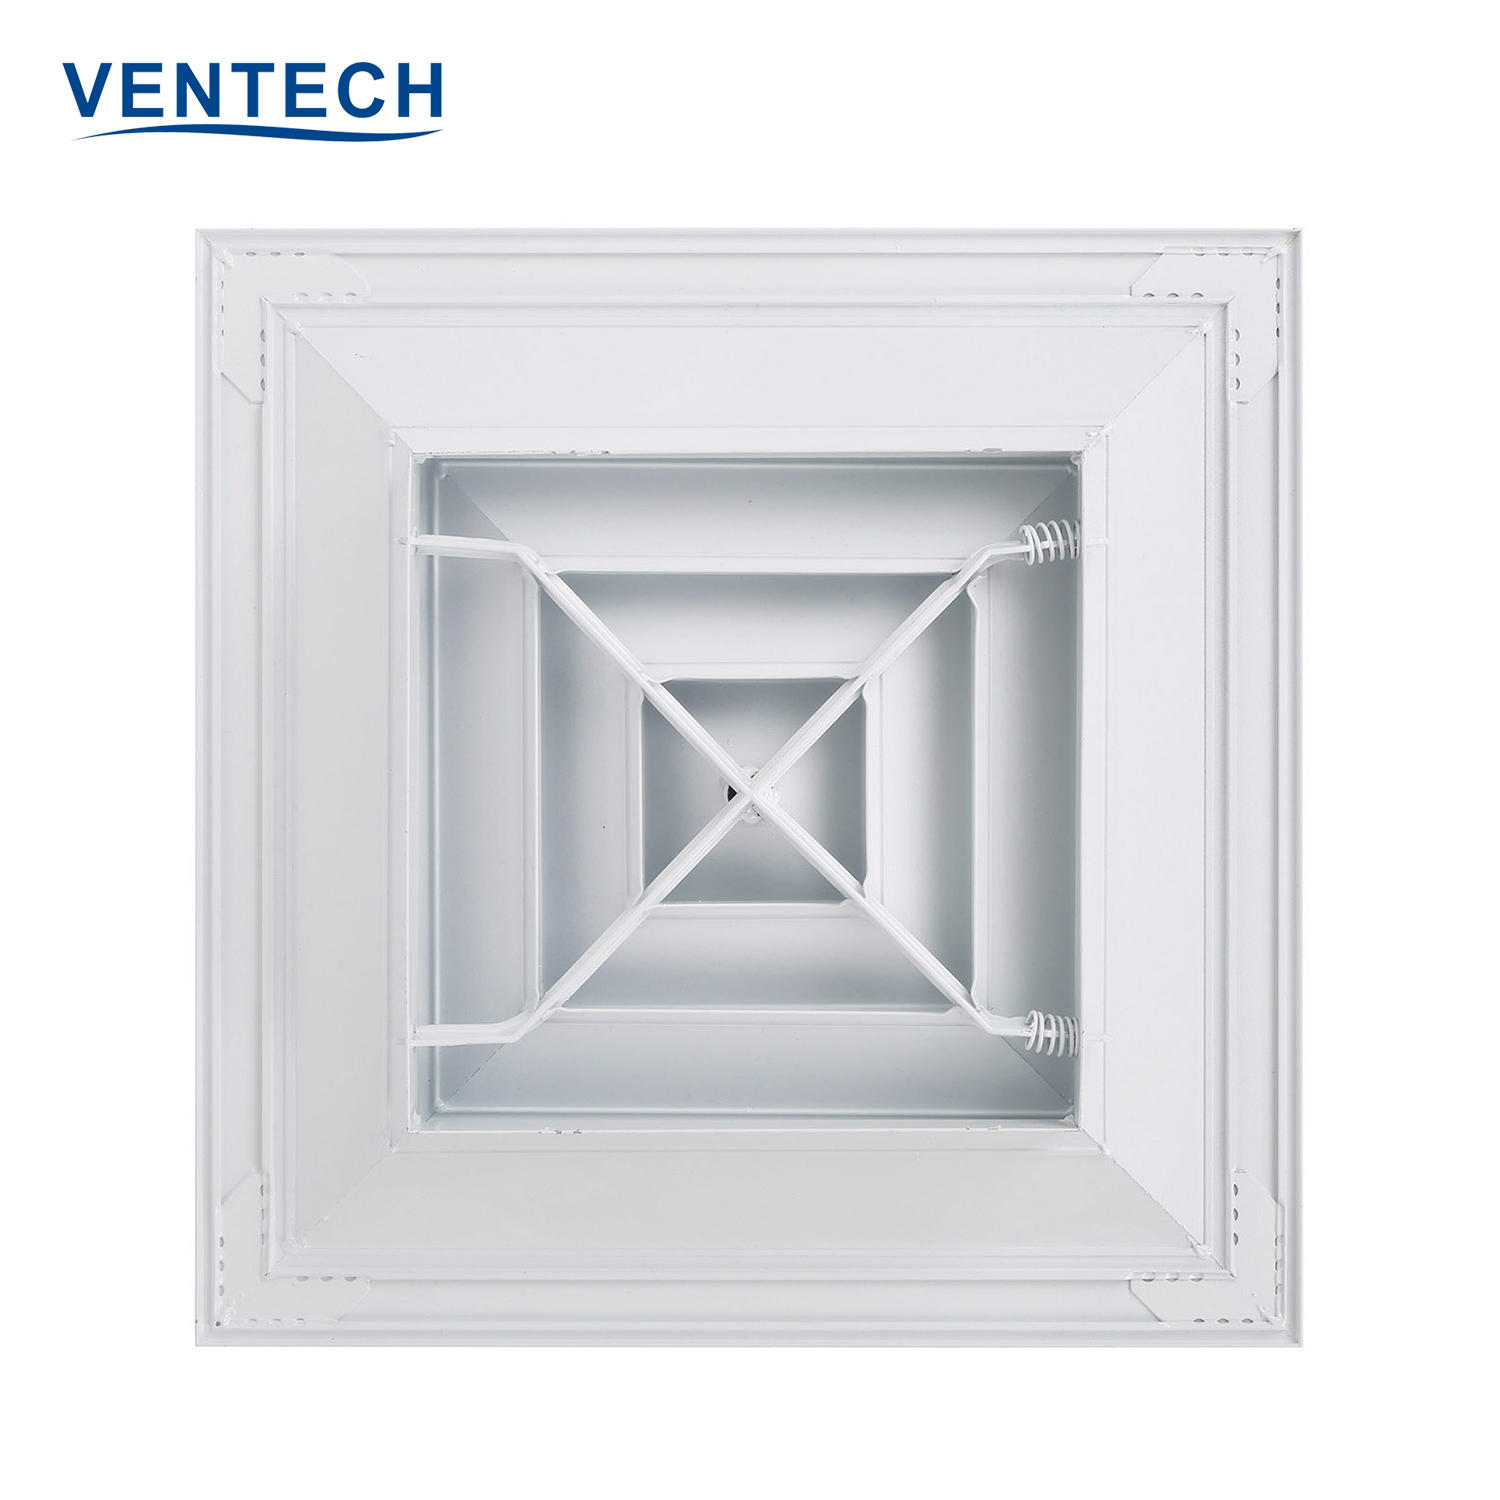 VENTECH Hvac System Exhaust Air Duct Conditioning Aluminum Square Air Ceiling Diffusers